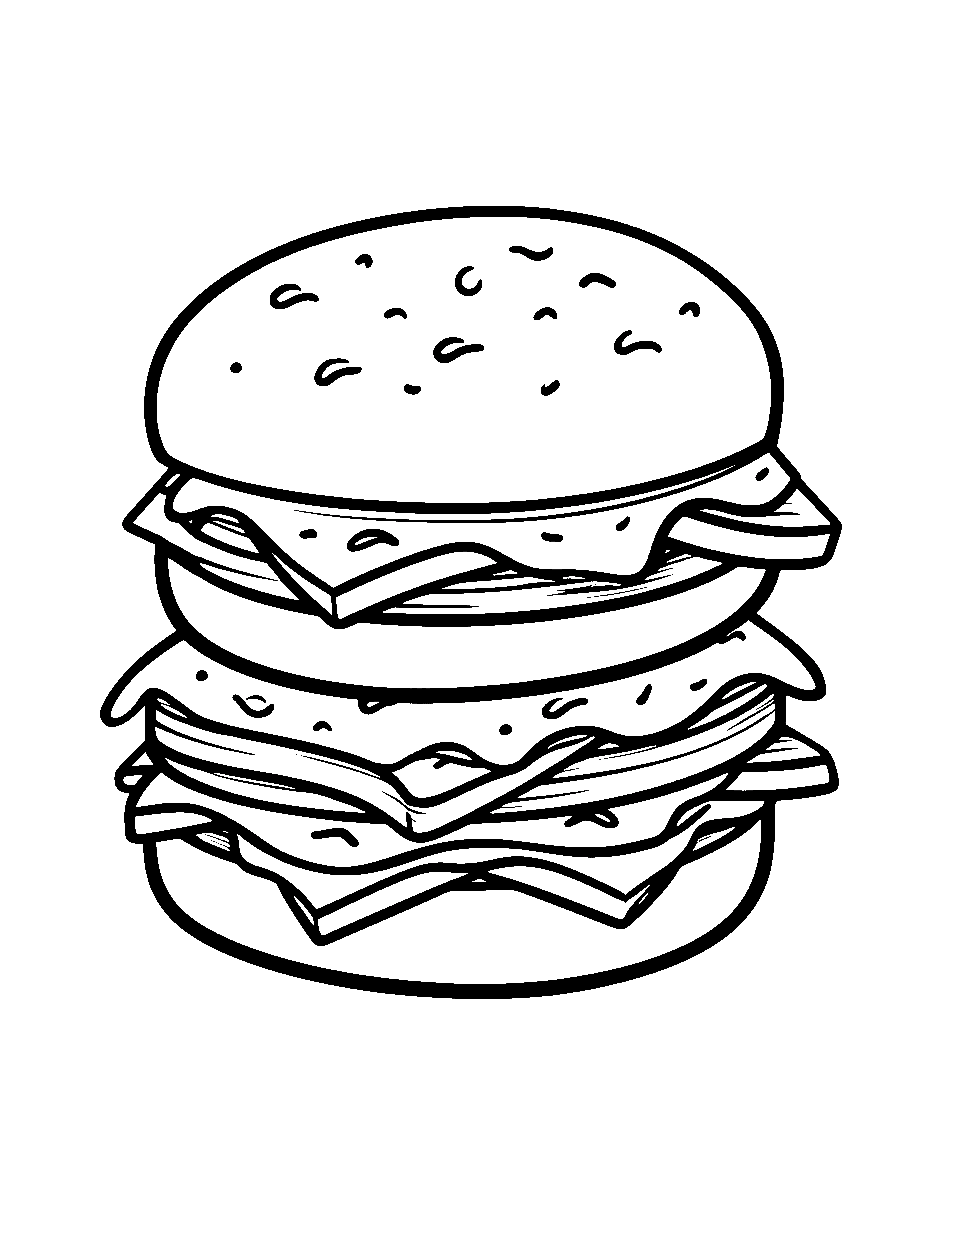 Simple Burger Stack Food Coloring Page - A Burger stacked with cheese, lettuce, and tomato.